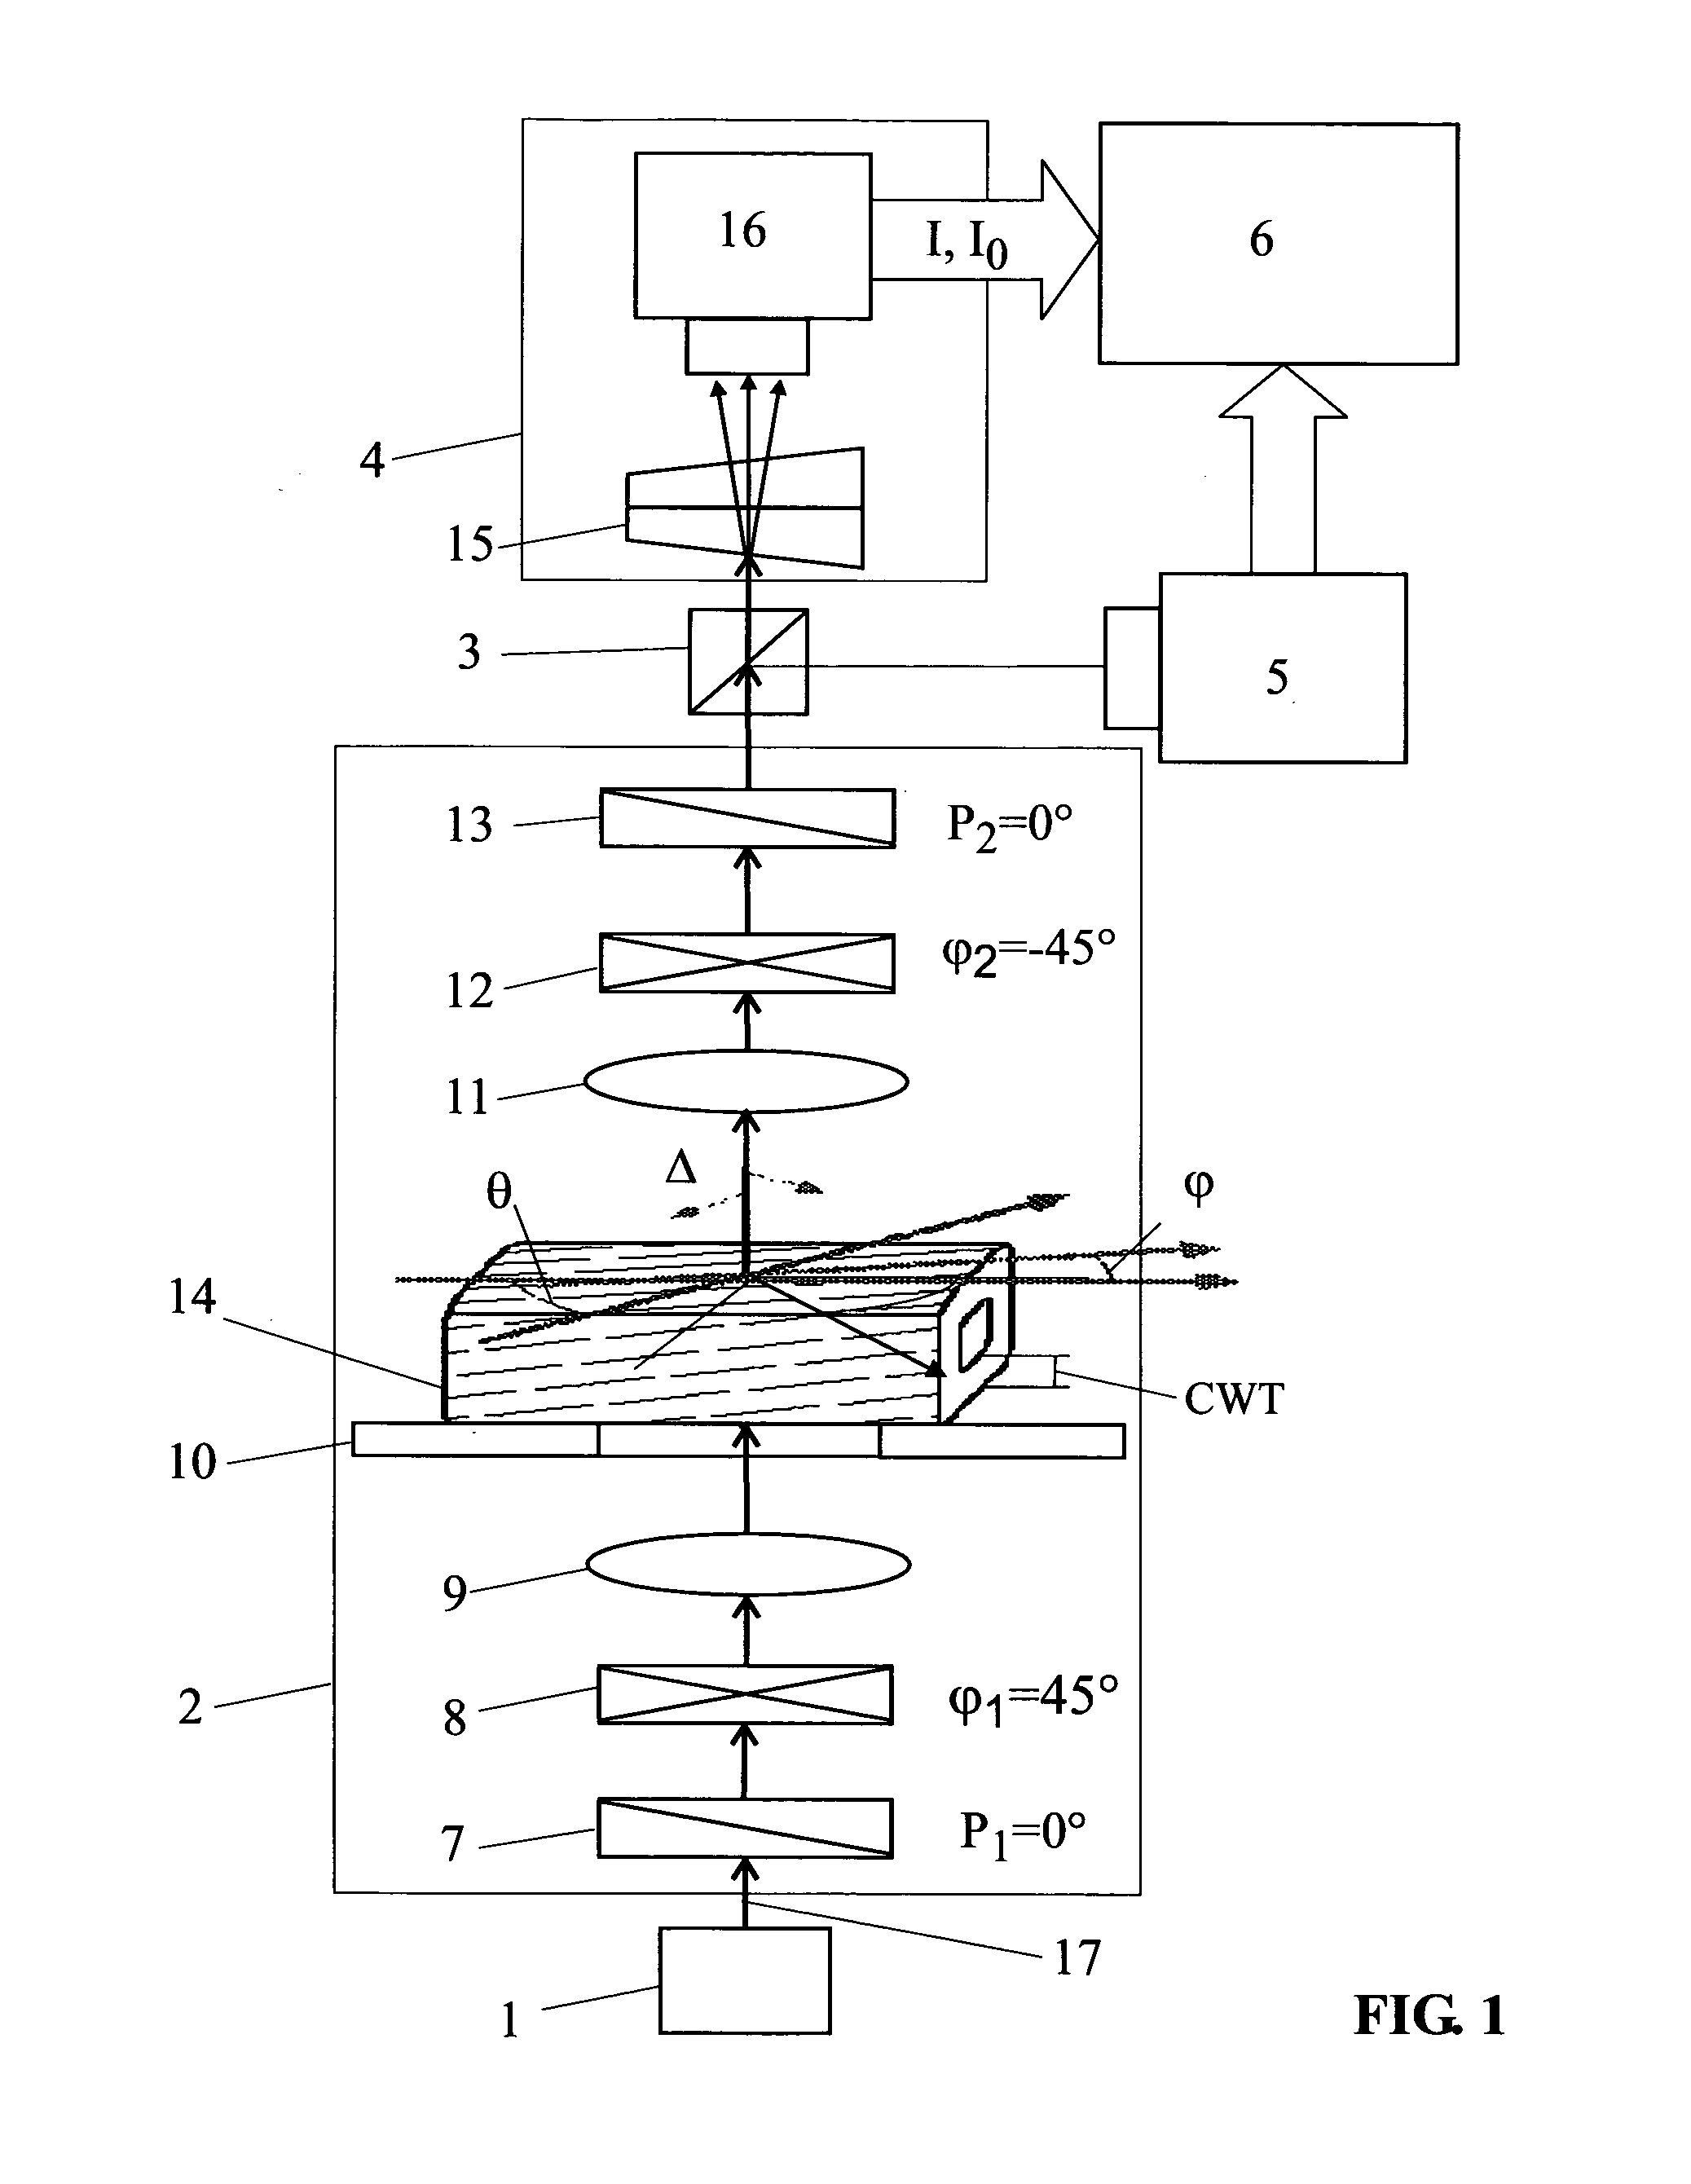 Method and equipment for measurement of intact pulp fibers